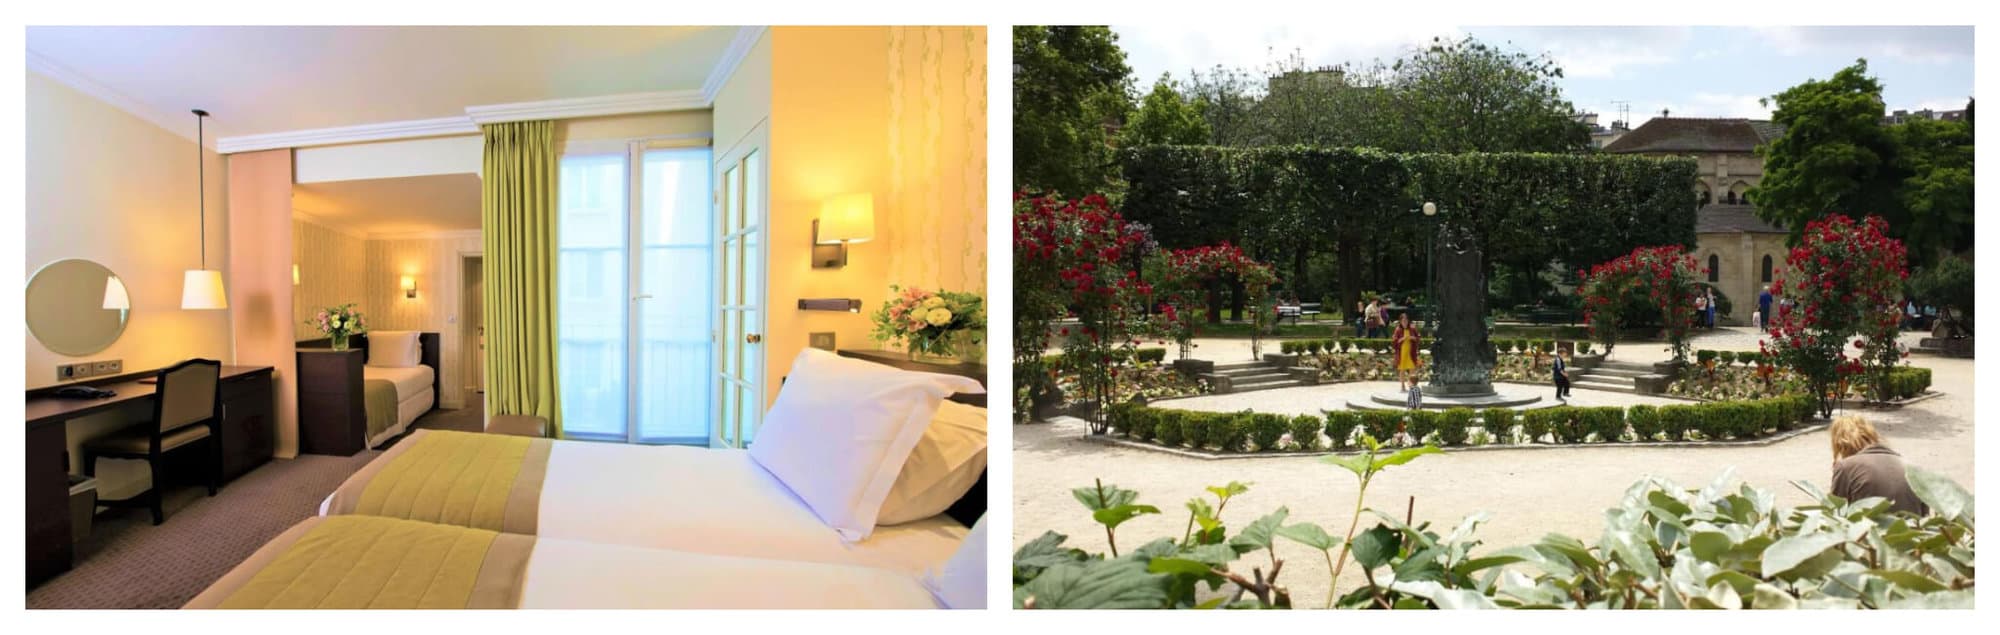 Left: Paris Hotel Henri IV's family suite with 3 beds in white and green sheets, inside a room decorated with green curtains and beige walls; Right: The garden of Hotel Henri IV Rive Gauche with green shrubs and red flowers.